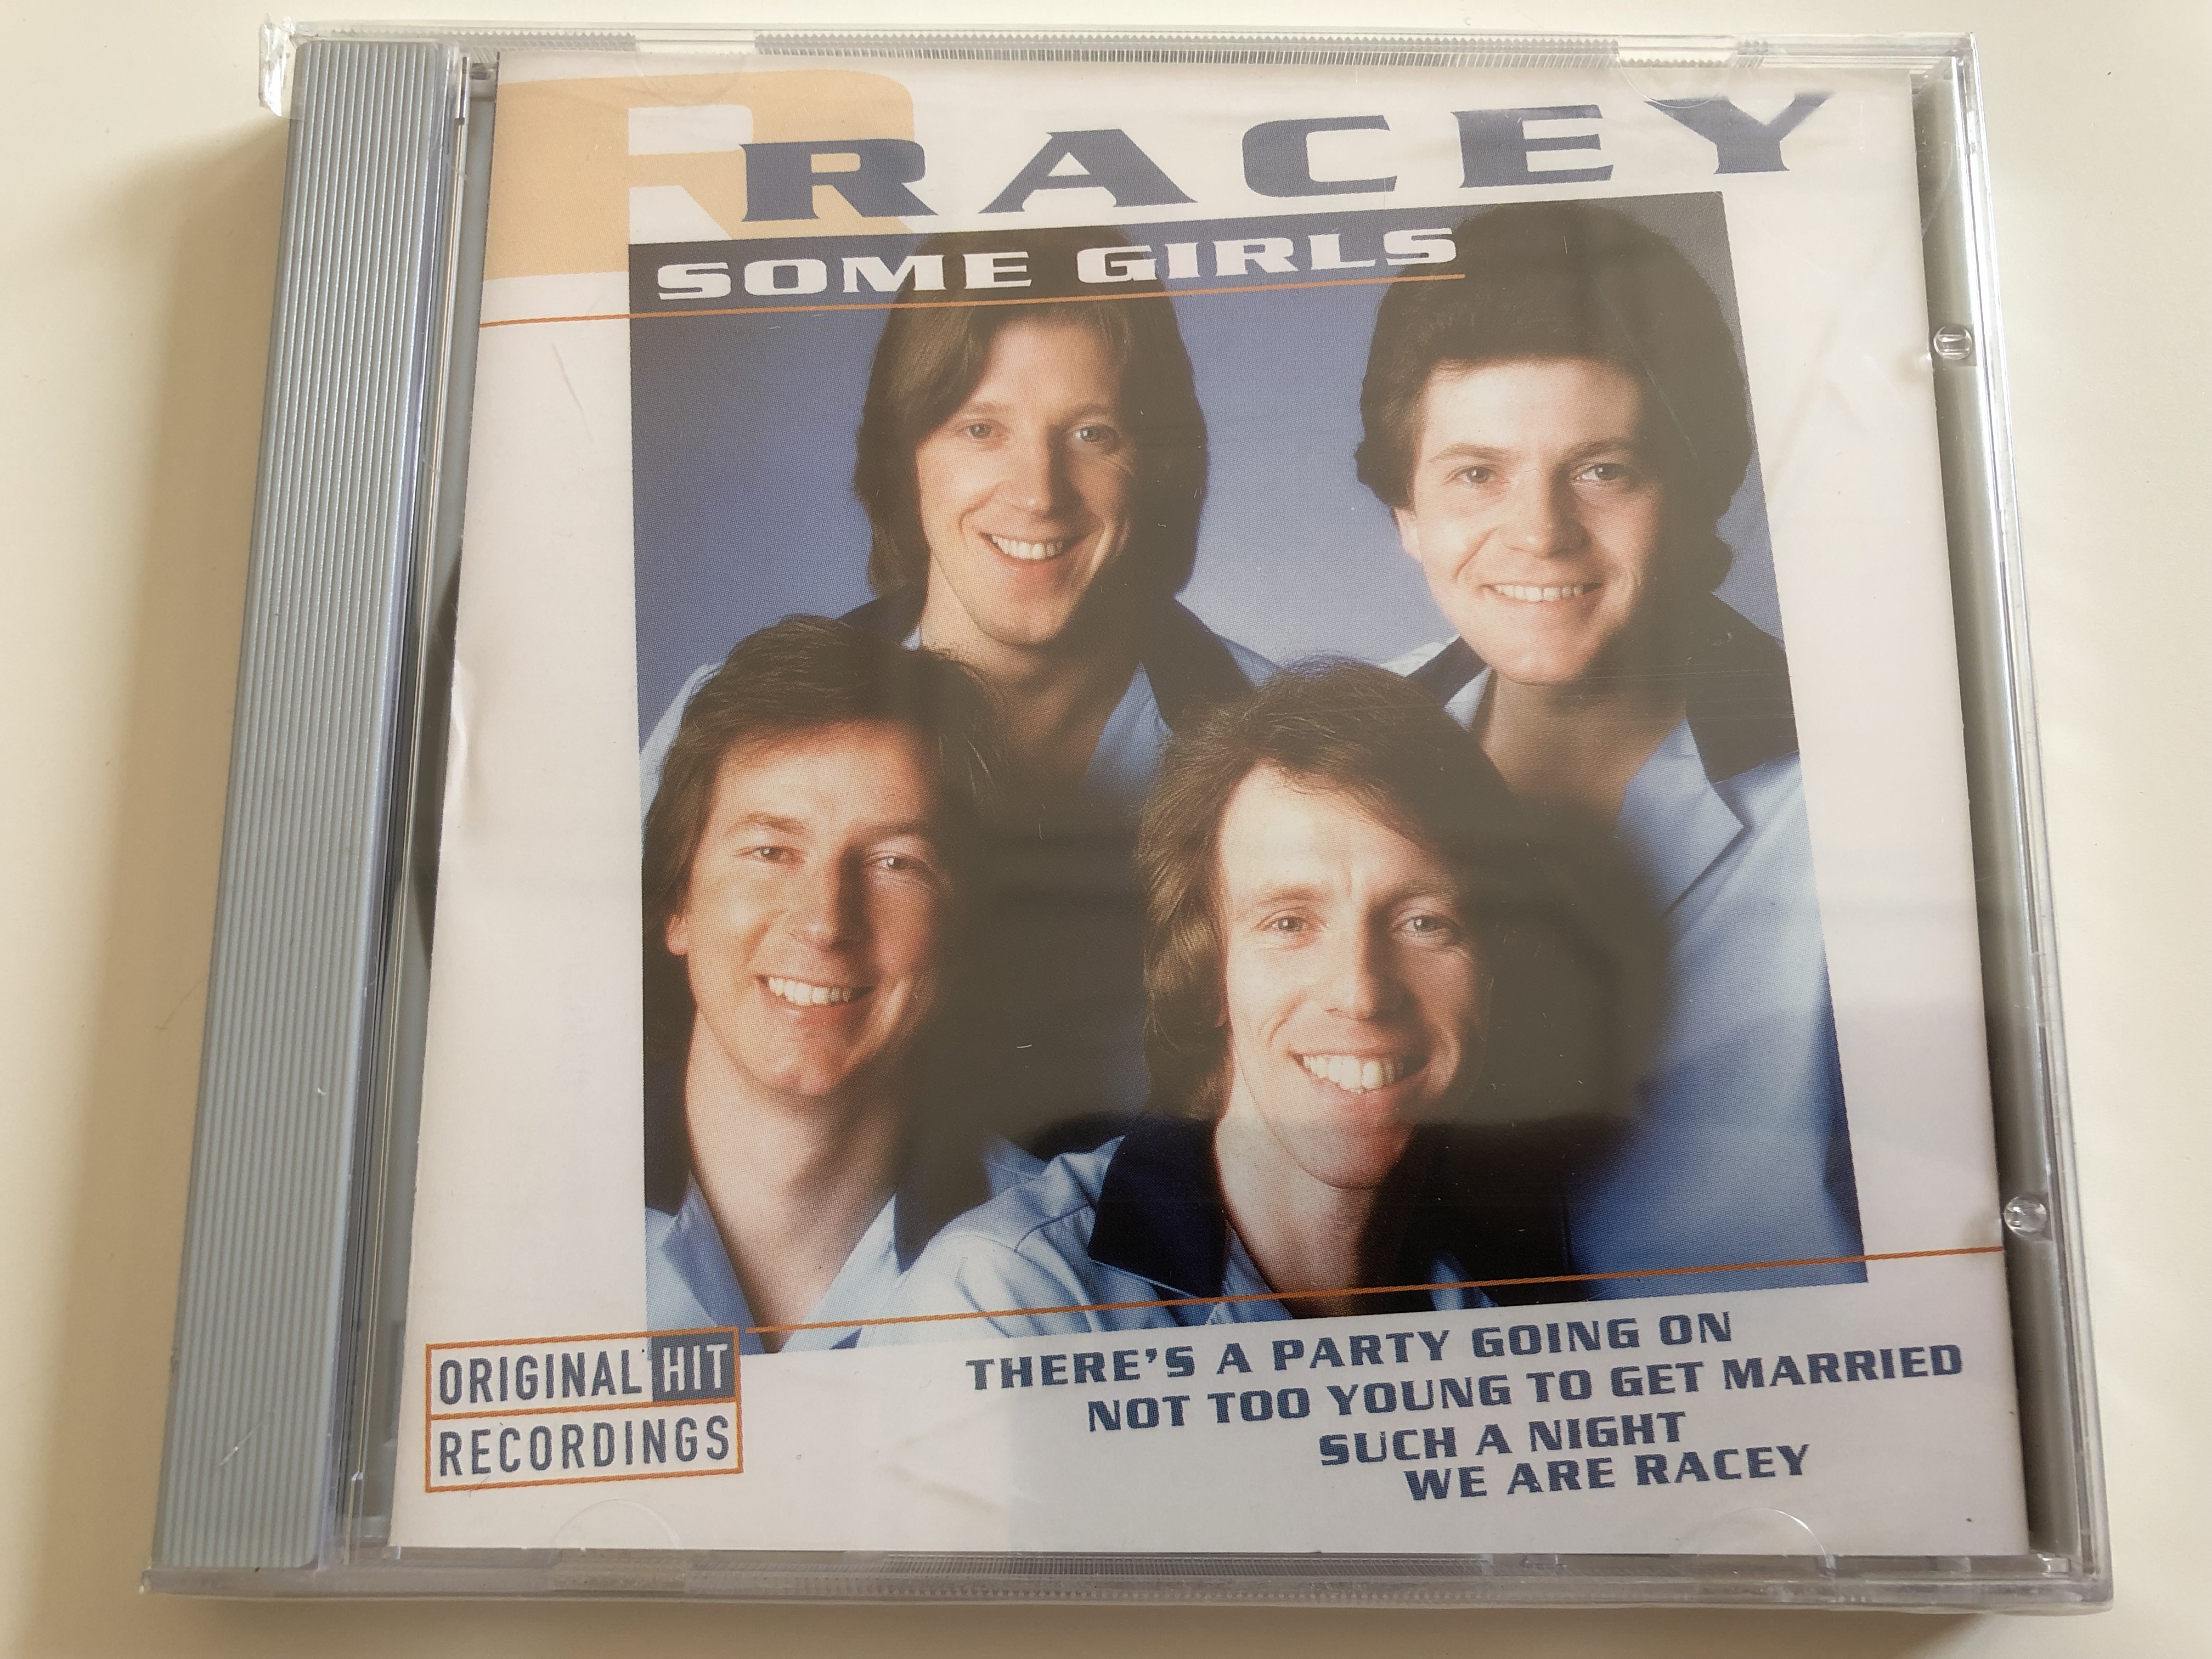 racey-some-girls-there-s-a-party-going-on-not-too-young-to-get-married-such-a-night-we-are-racey-wise-buy-audio-cd-1998-wb-885562-1-.jpg